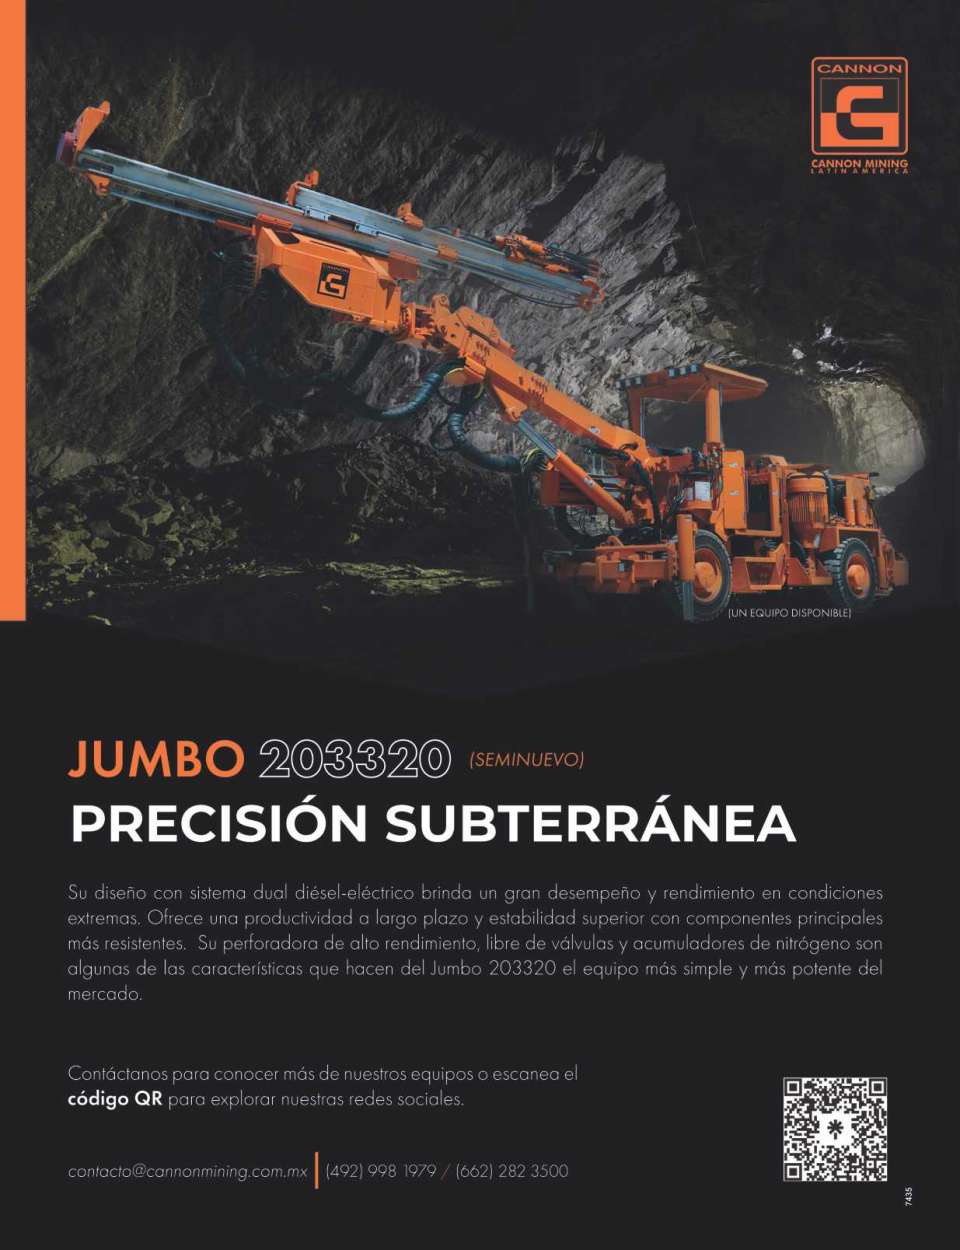 Jumbo 203320, underground precision, dual diesel-electric system design, long-term productivity and superior stability. preowned equipment